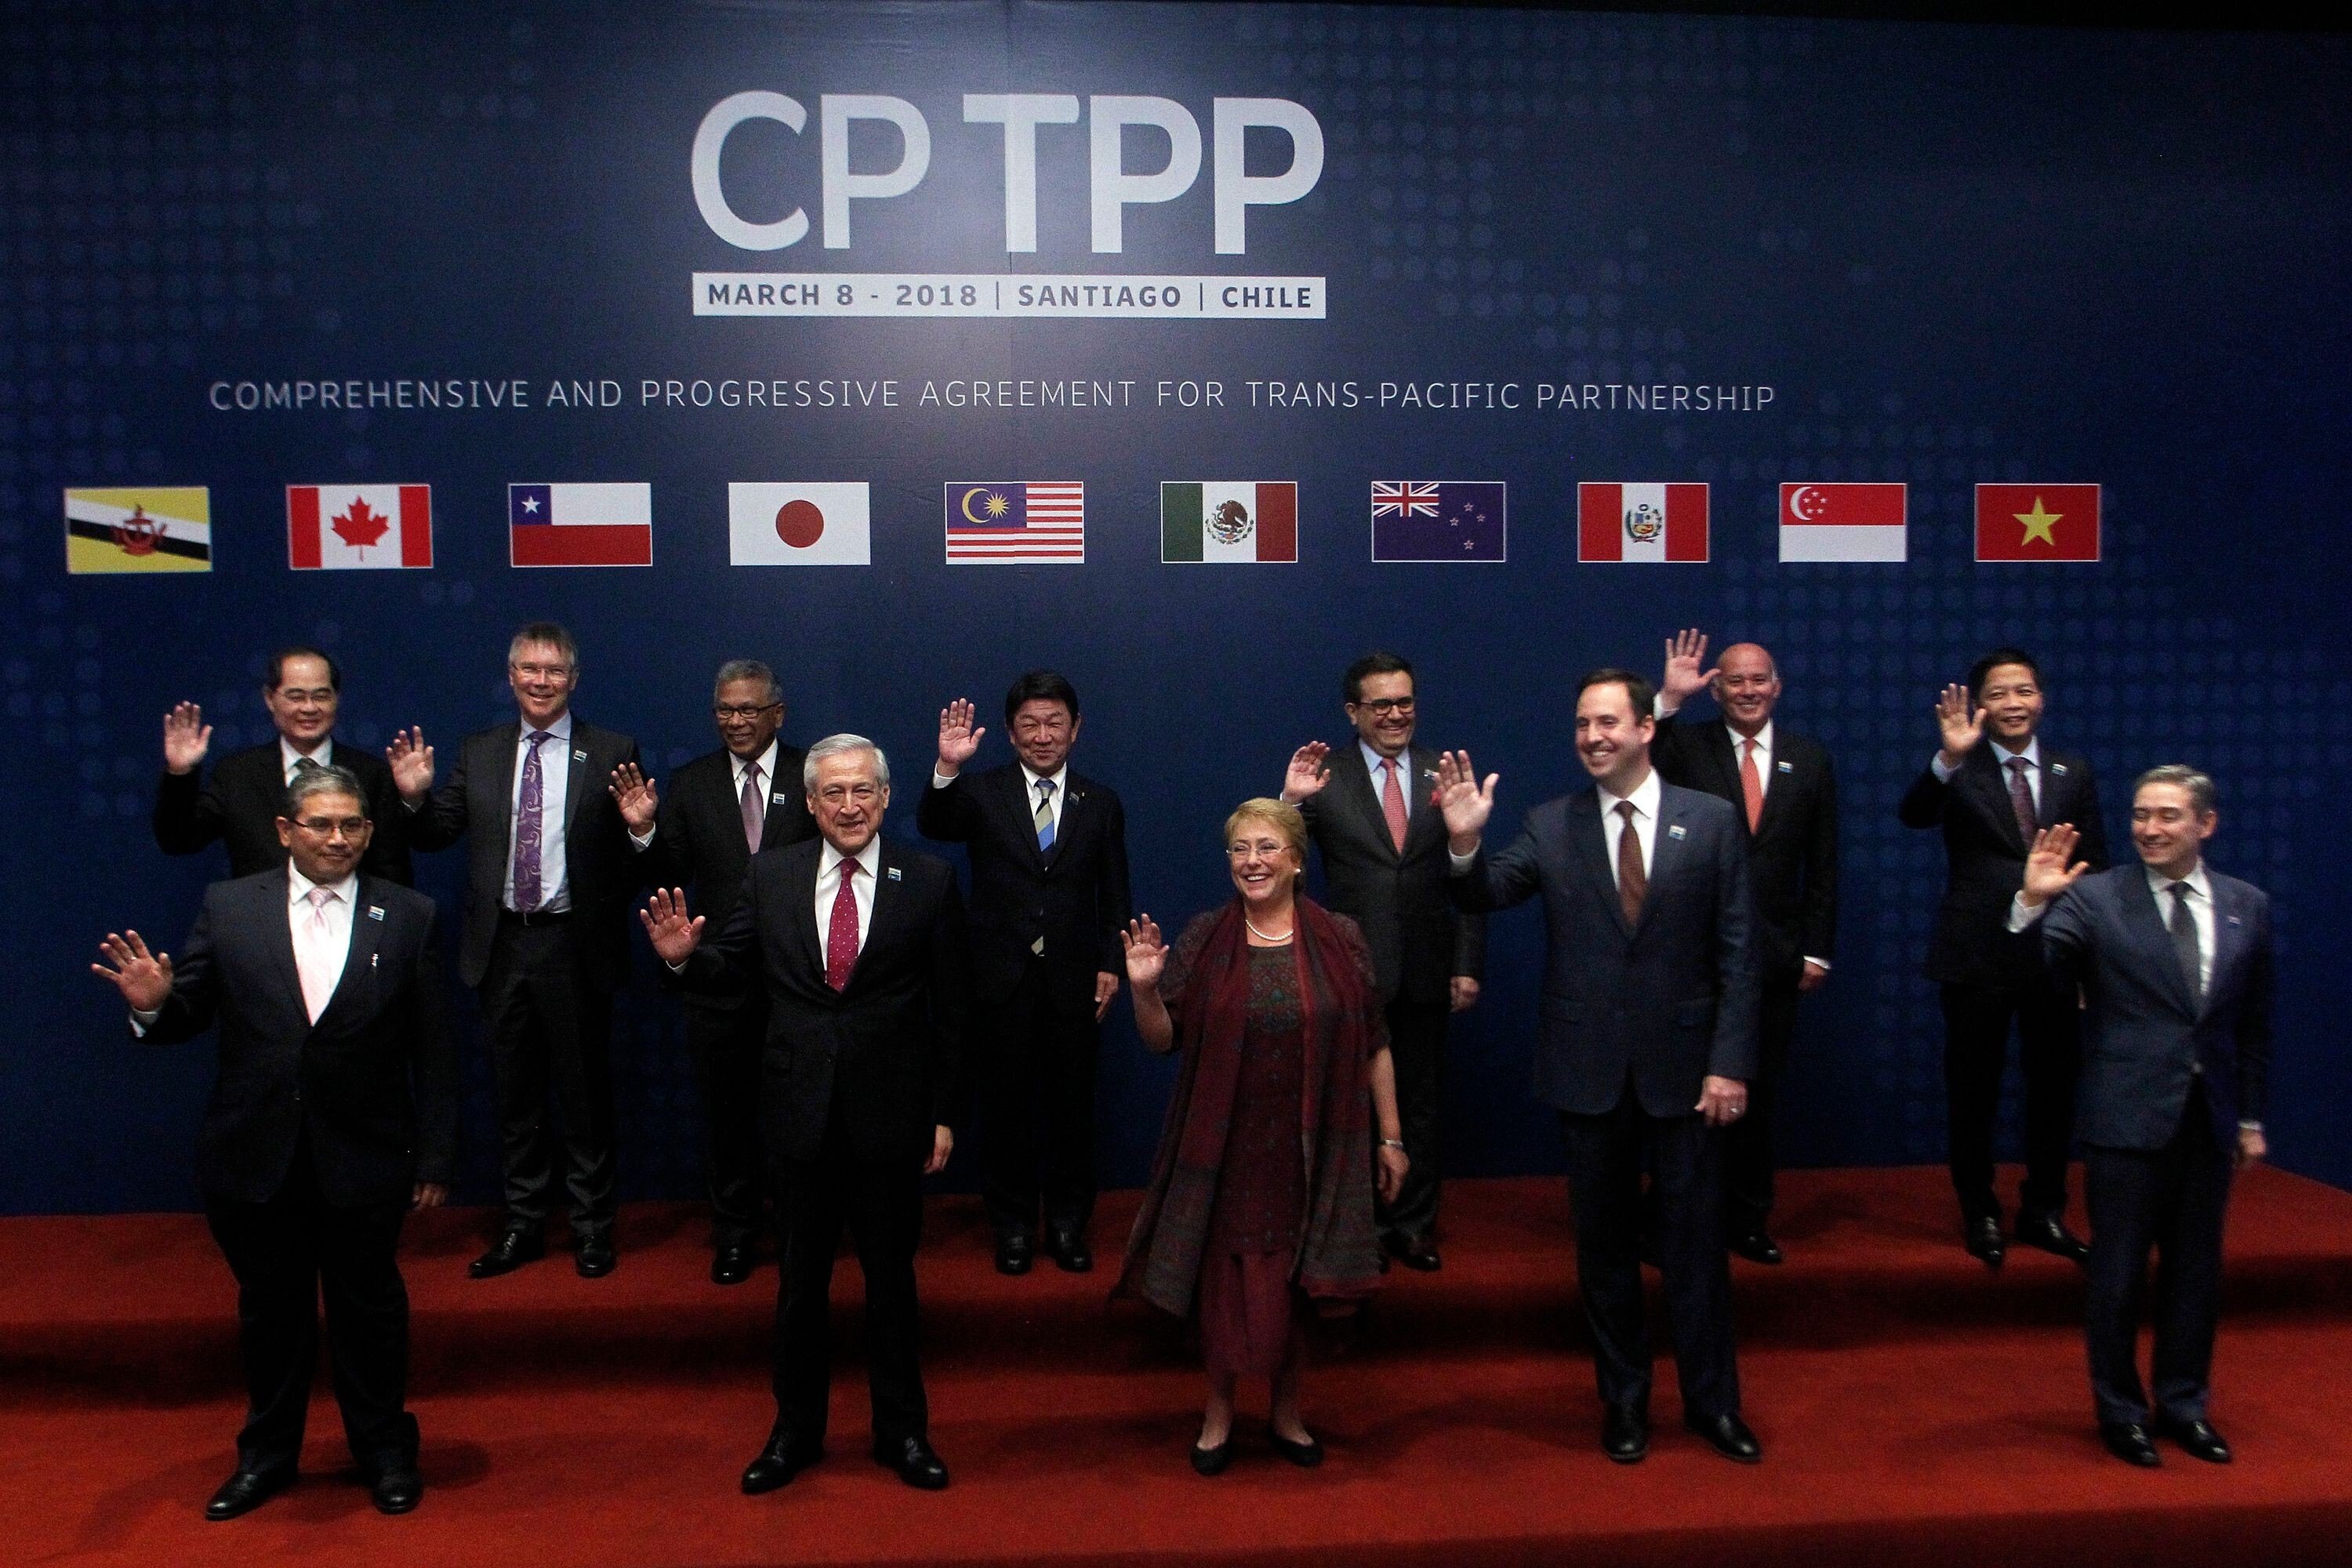 The Comprehensive and Progressive Agreement for Trans-Pacific Partnership (CPTPP), which includes New Zealand, Japan, Canada, Mexico and seven other countries, accounts for about 13 per cent of global commerce. Photo: AFP